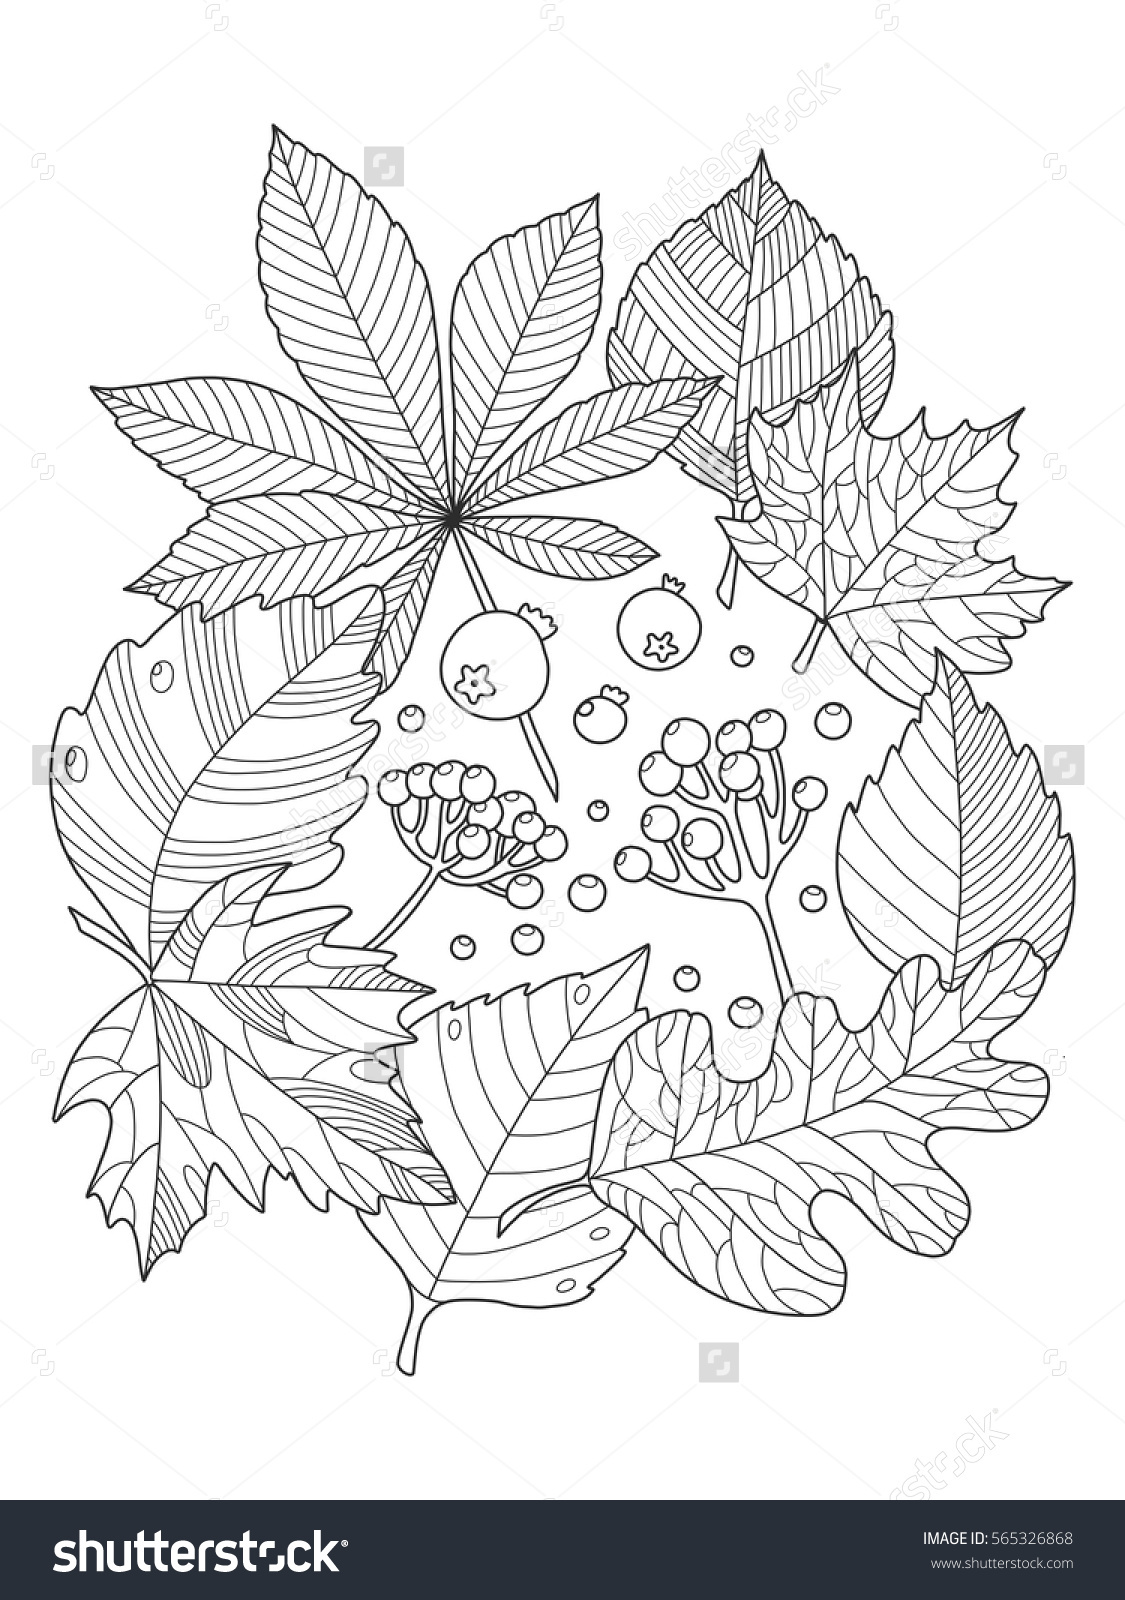 Foliage coloring #18, Download drawings